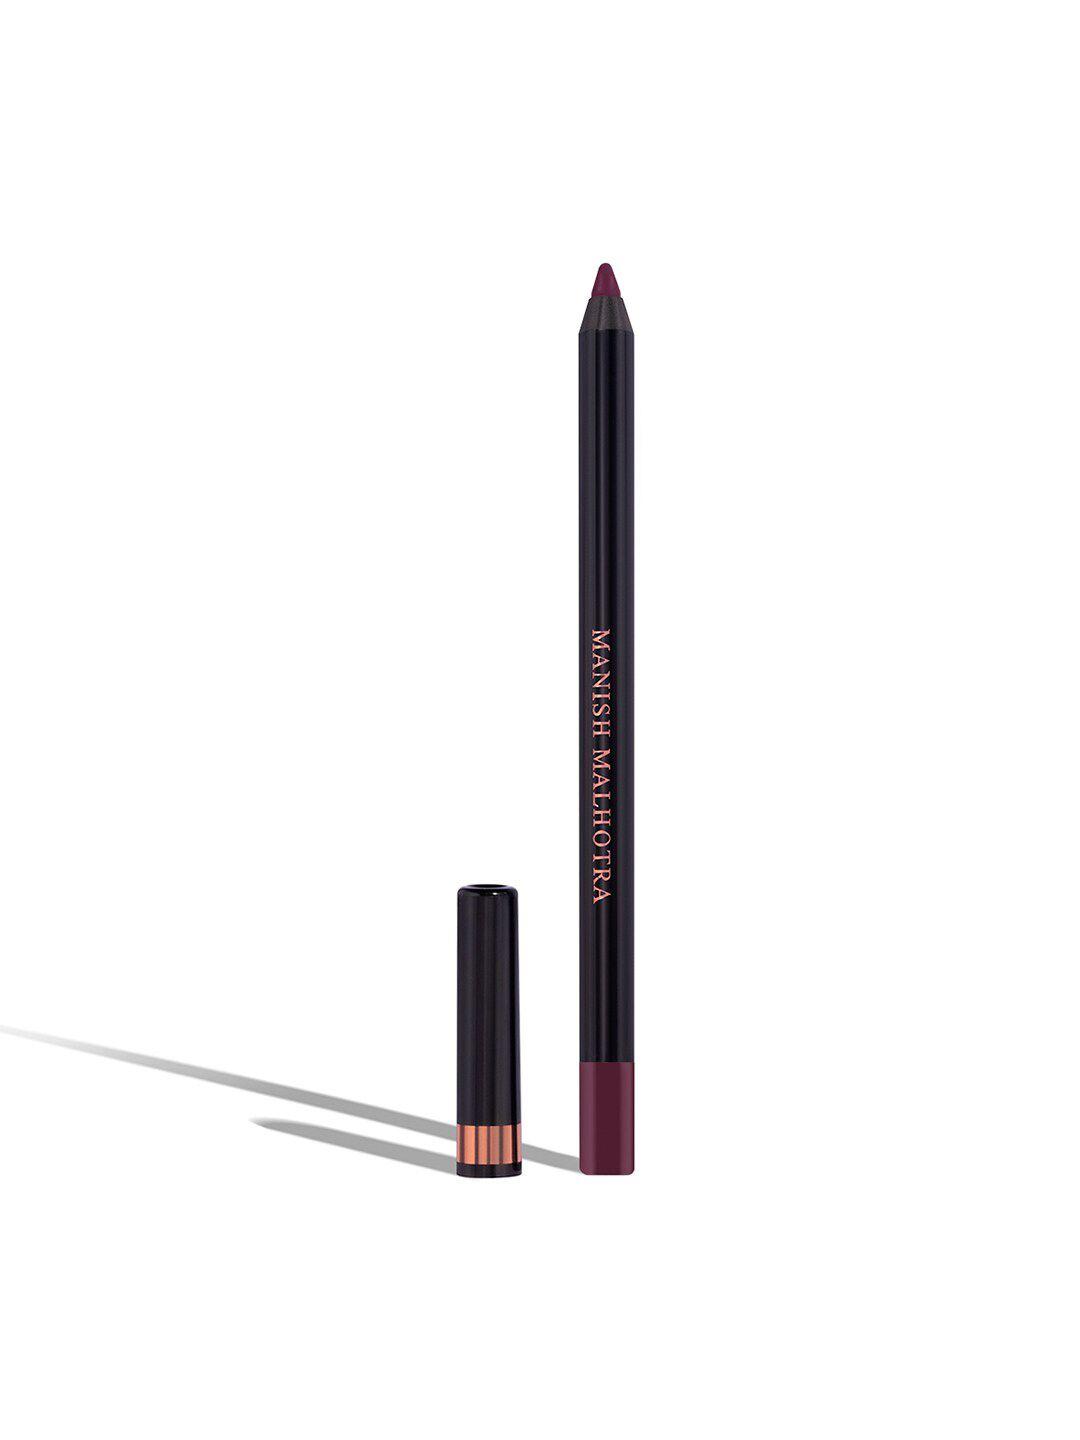 manish malhotra beauty by myglamm lip liner and filler -cabernet kiss-1.2g